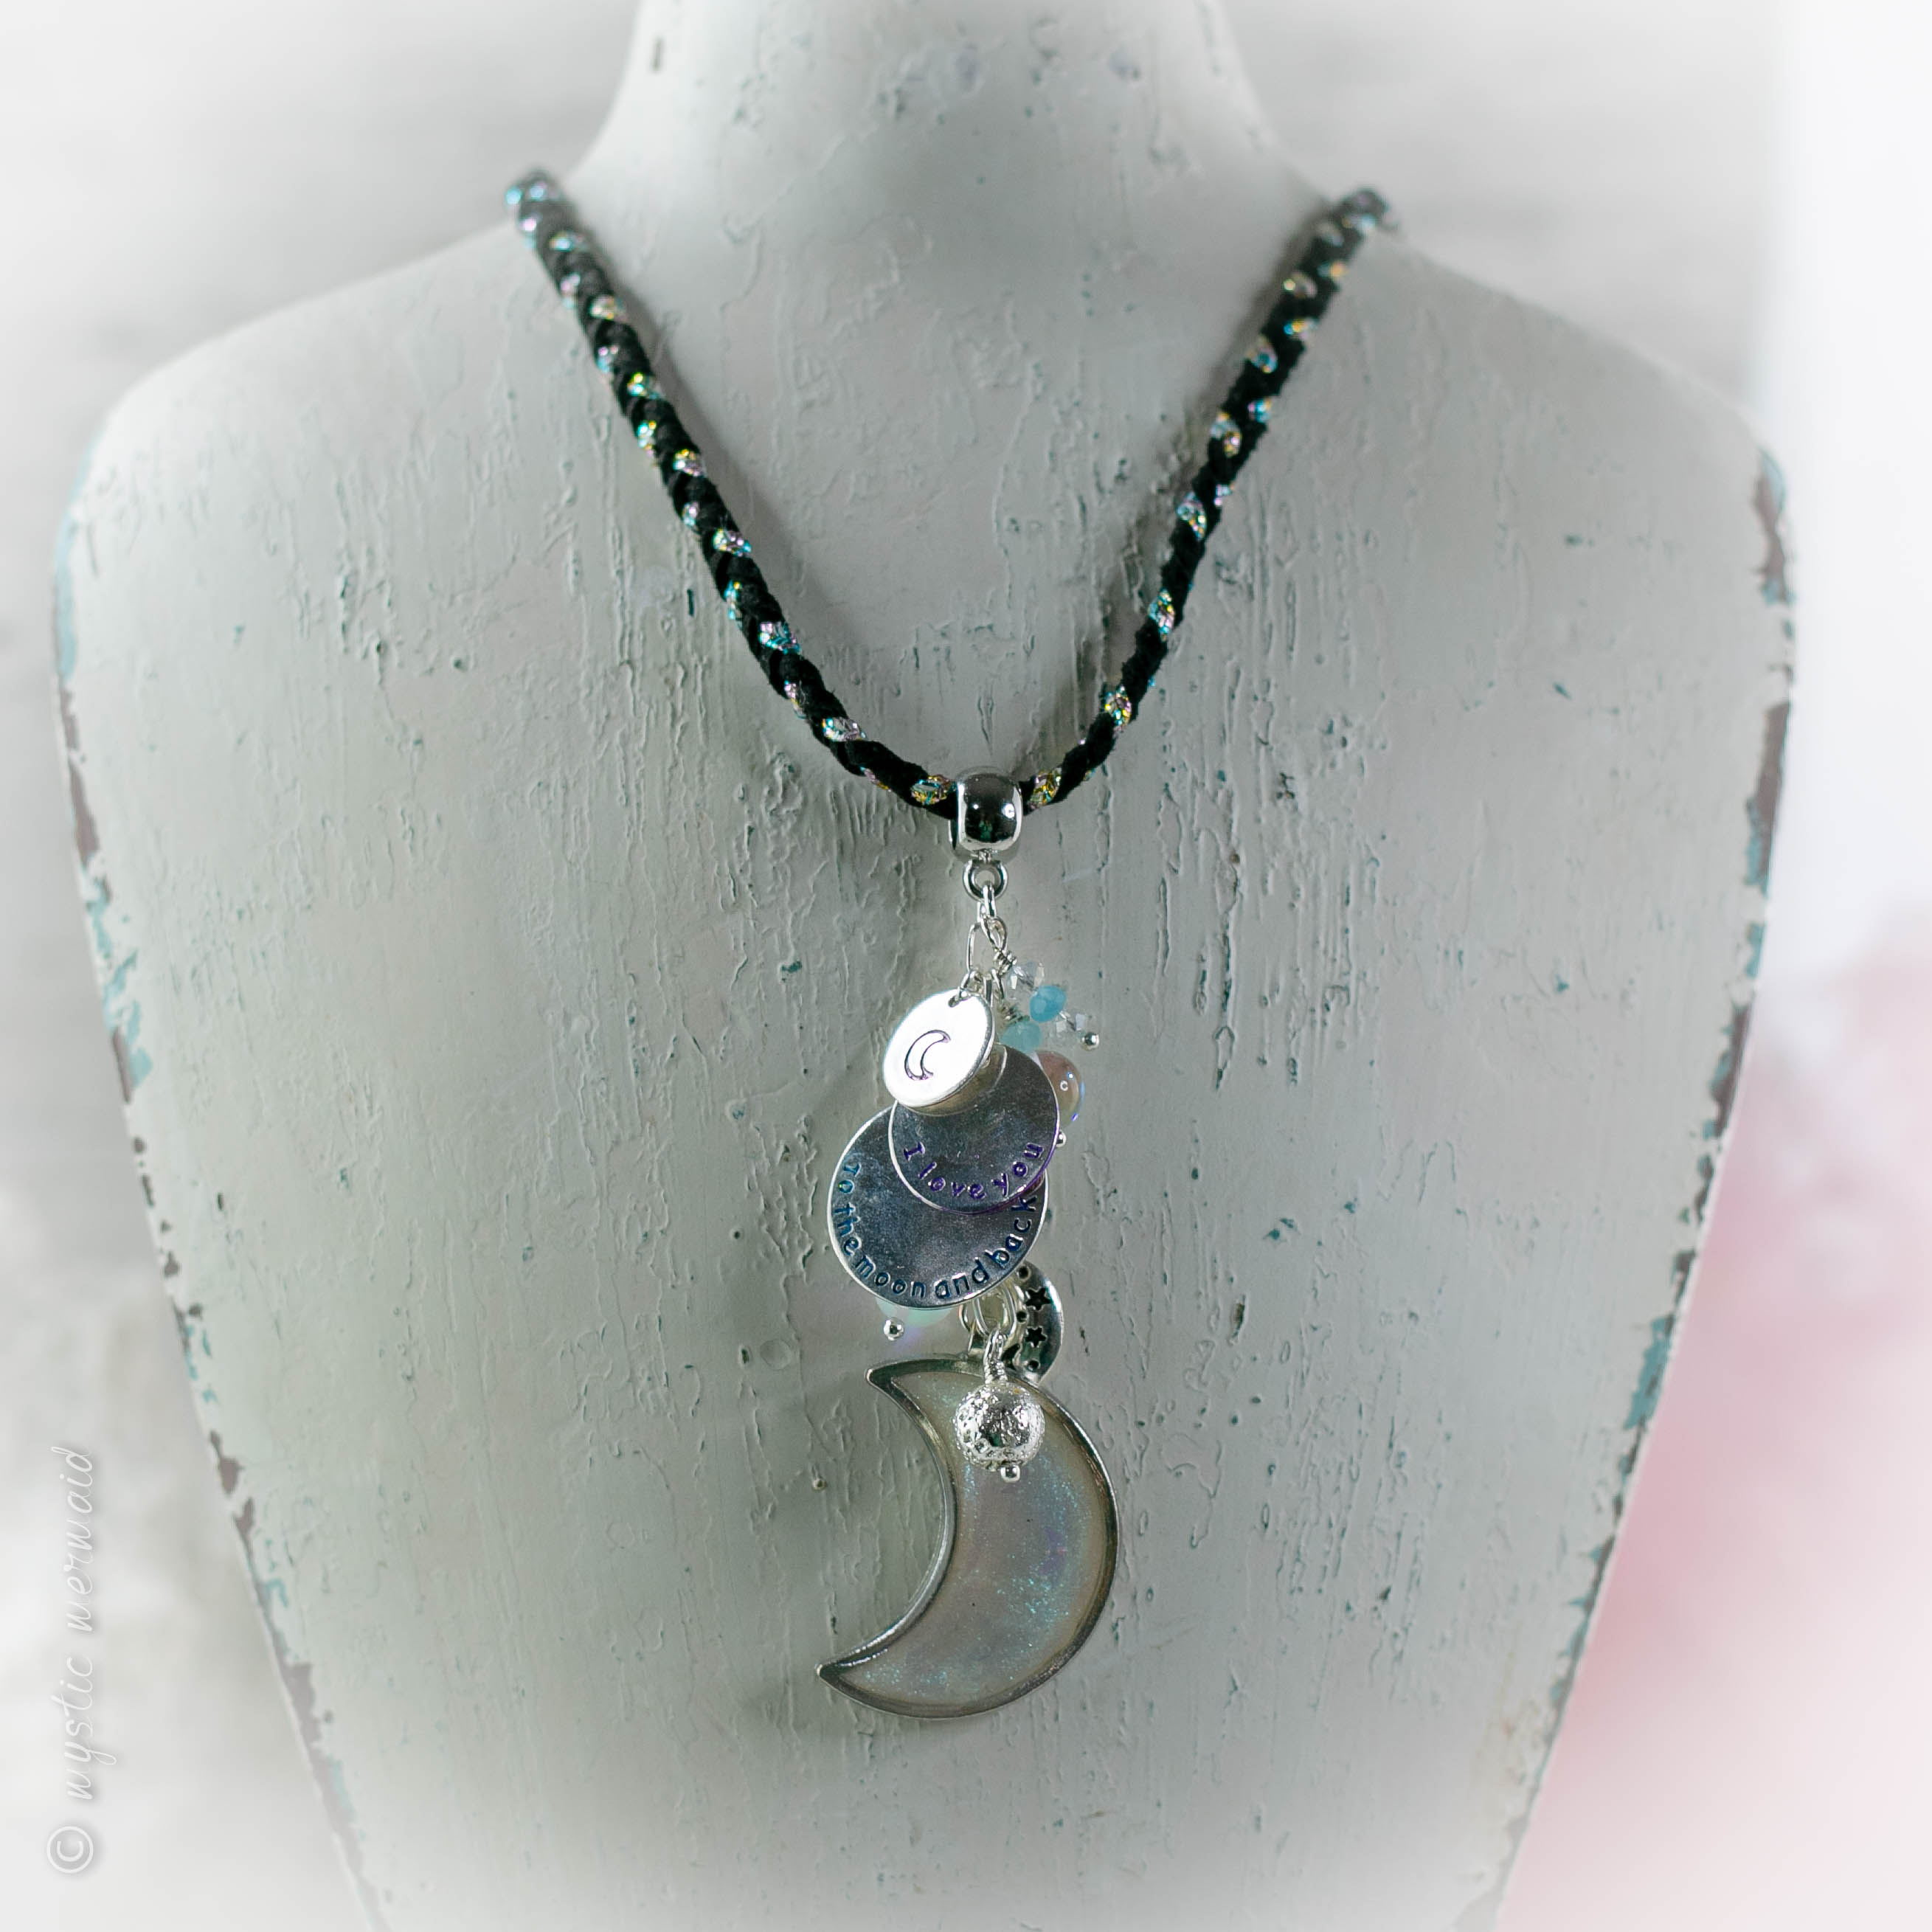 I Love You To the Moon and Back Lunar Sparkle Necklace